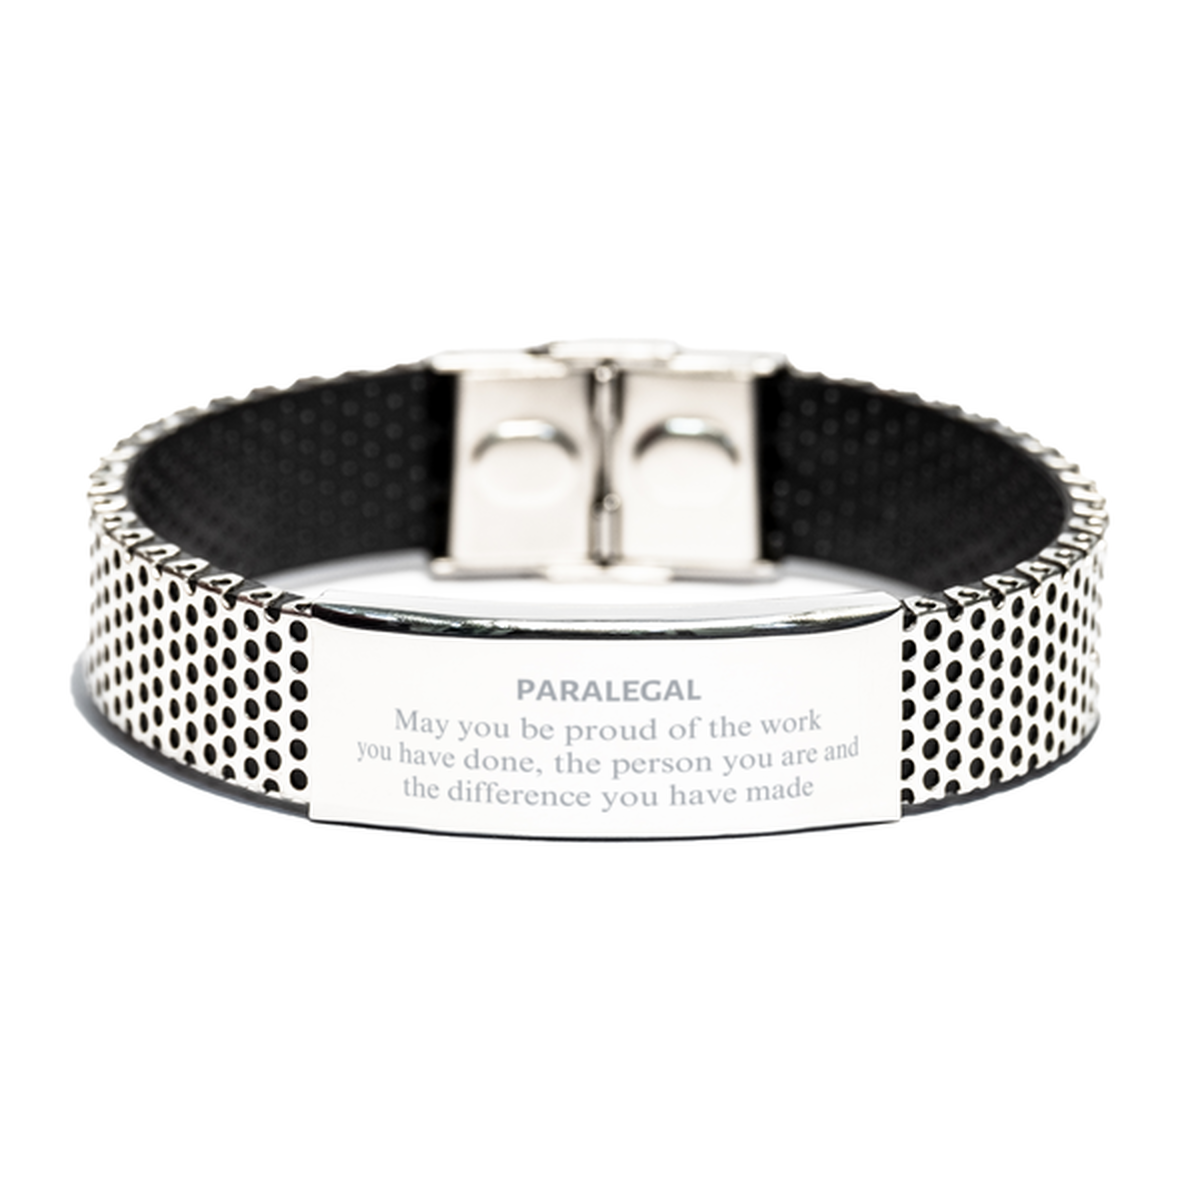 Paralegal May you be proud of the work you have done, Retirement Paralegal Stainless Steel Bracelet for Colleague Appreciation Gifts Amazing for Paralegal